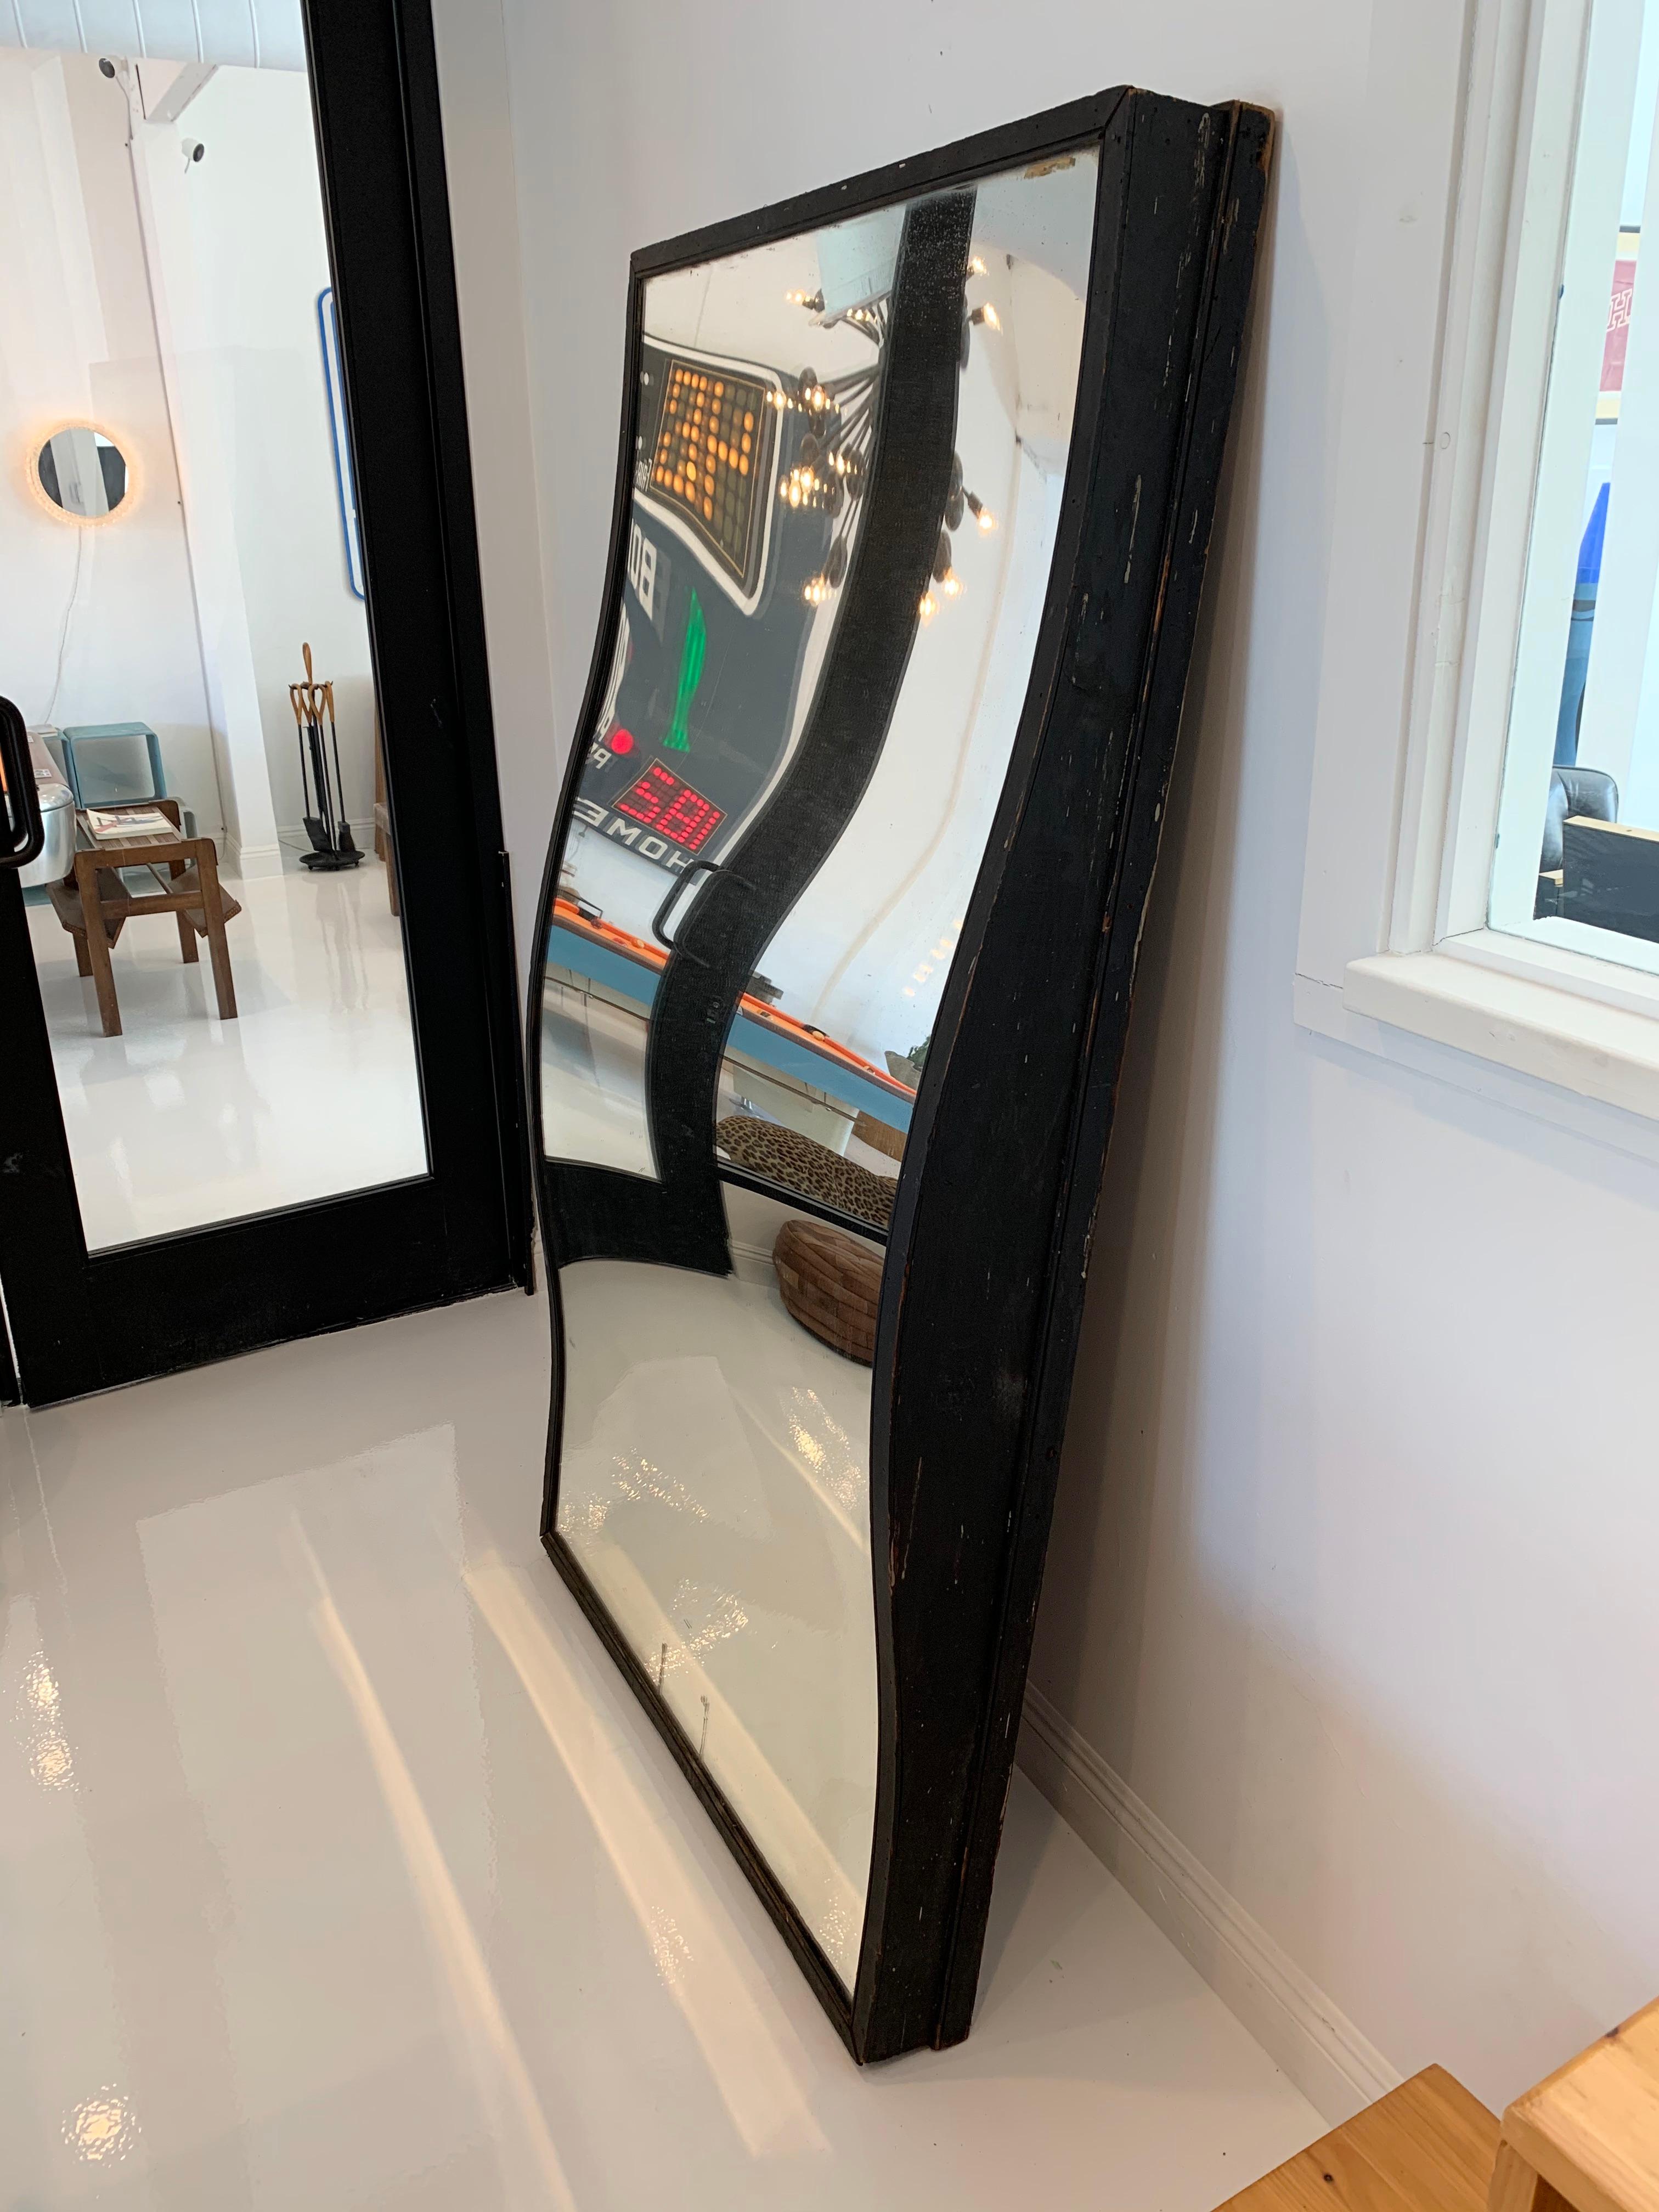 Massive carnival fun-house mirror. Unusually wide scale/frame. Wood frame with undulating glass. Great patina to glass, great vintage overall condition. Distorts the image depending on the distance from the mirror. Fun piece of wall art. 



